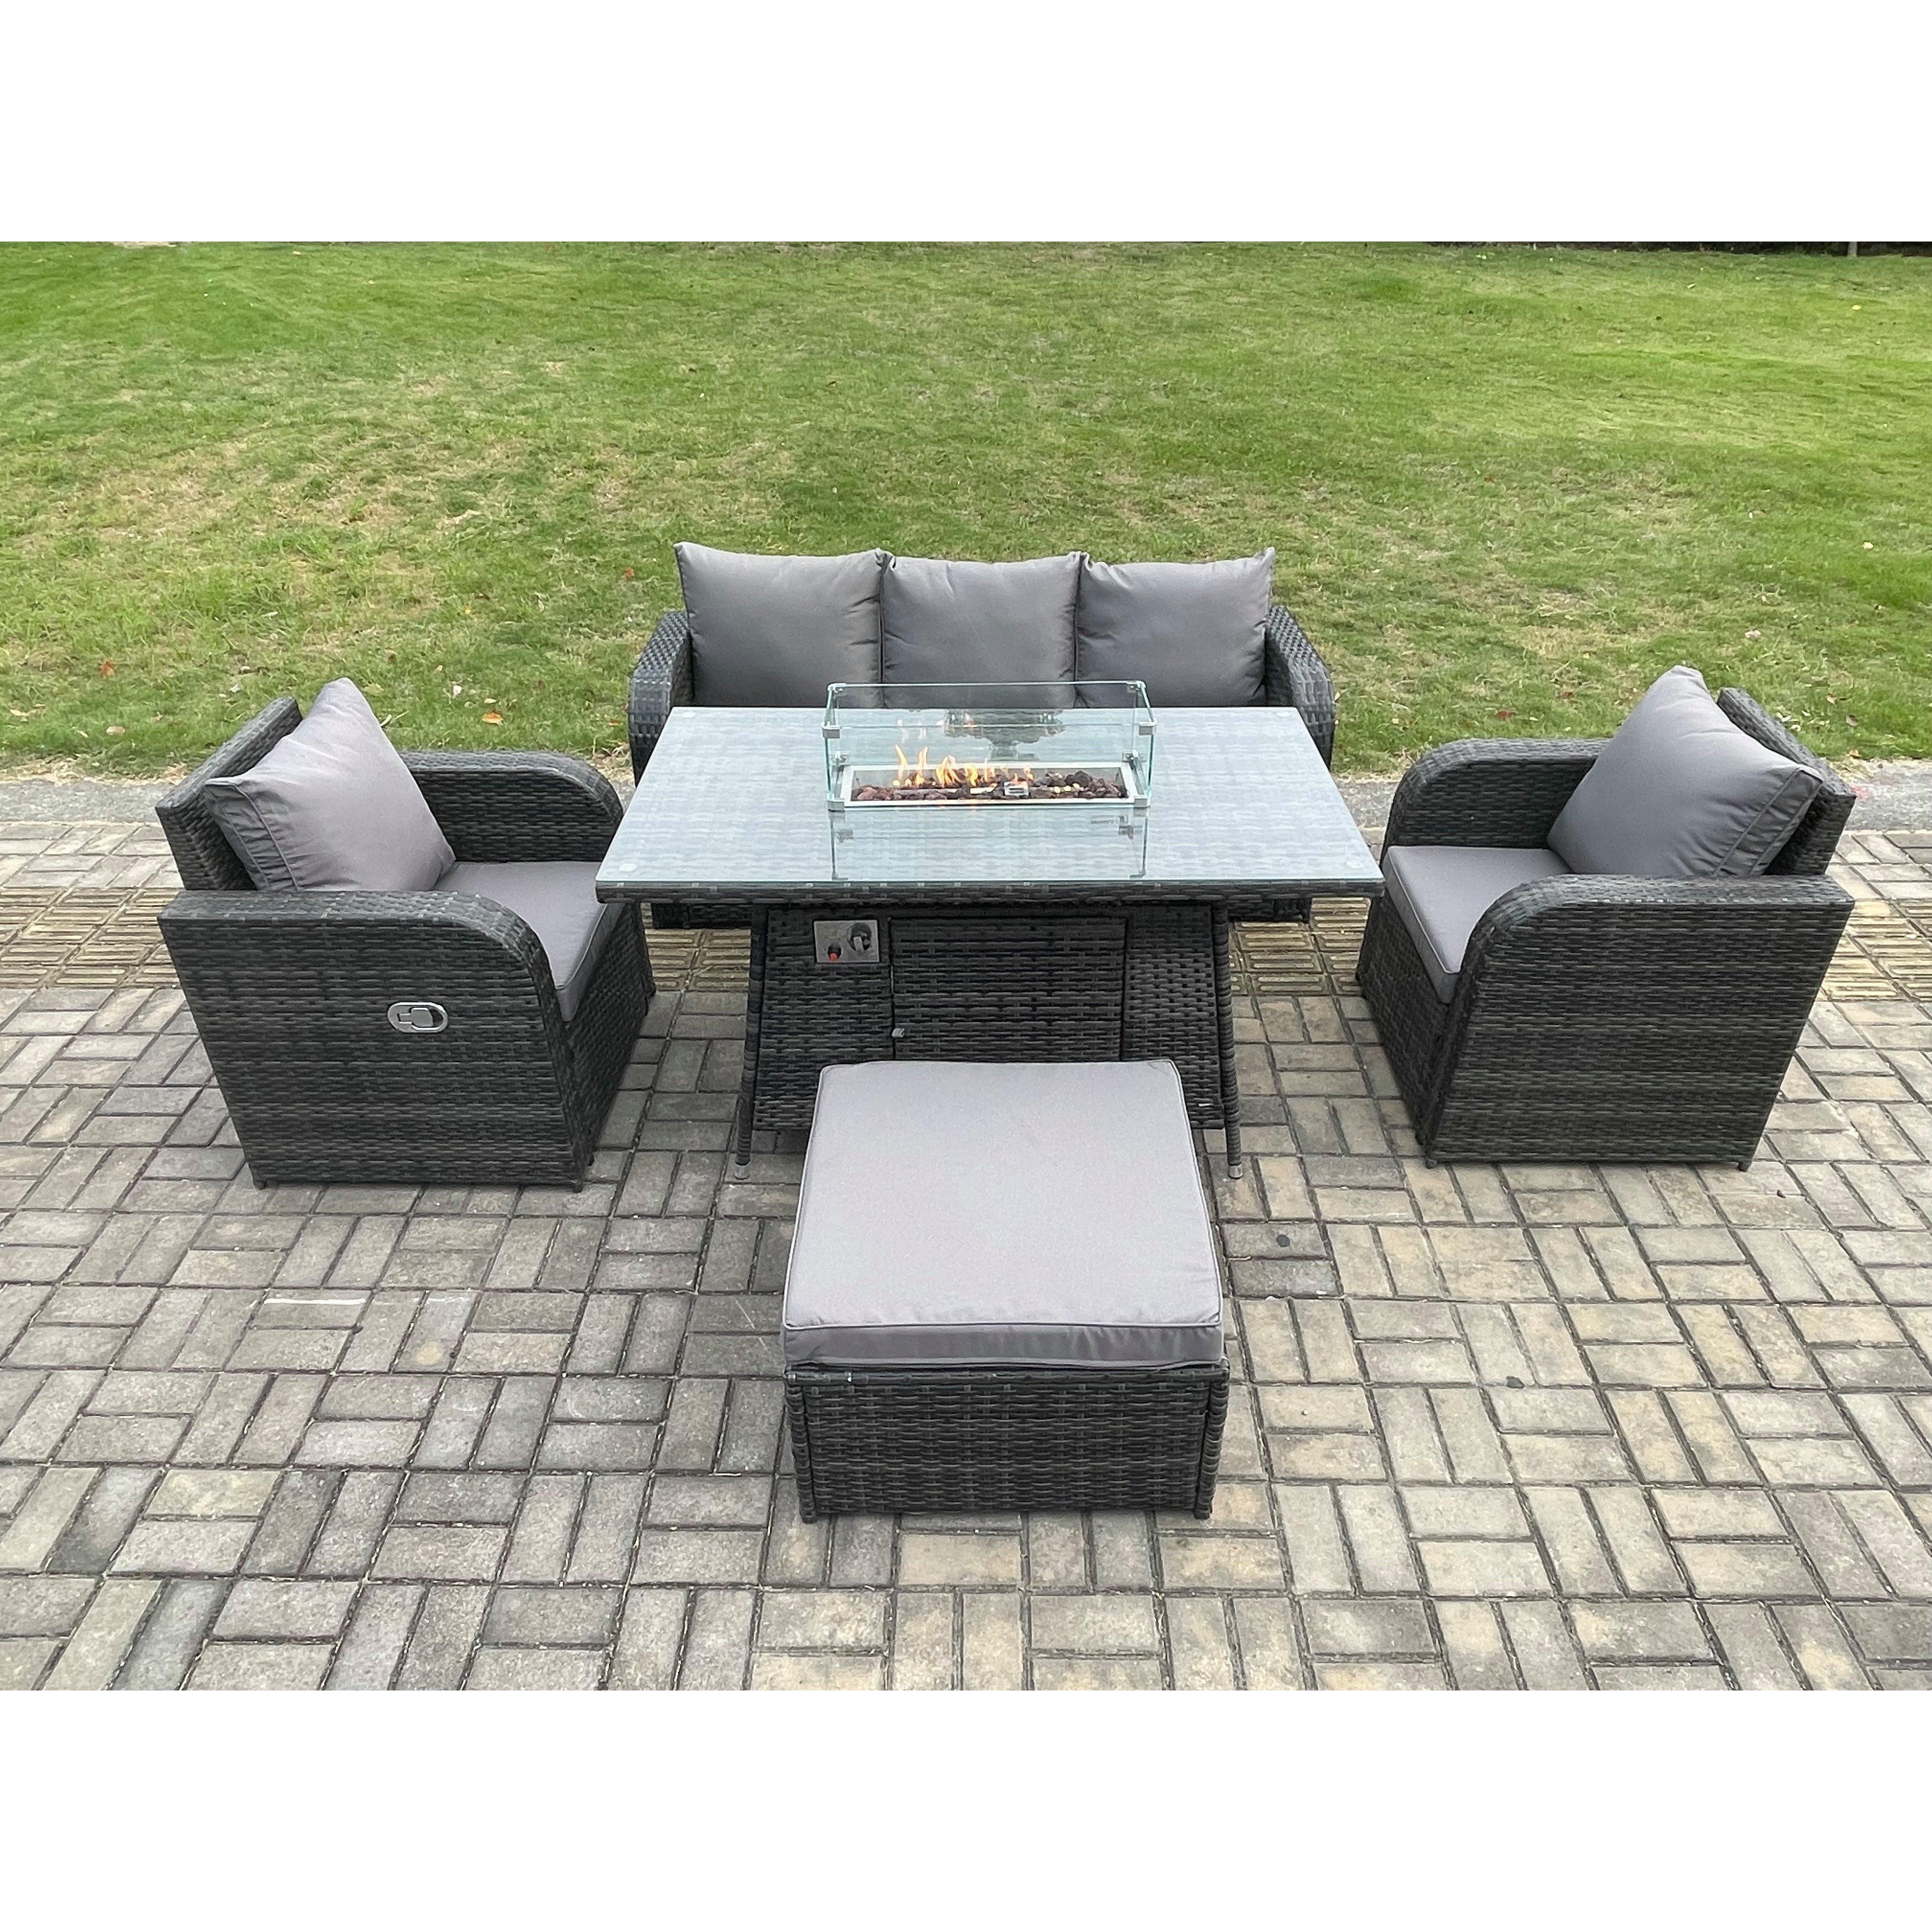 Patio Outdoor Rattan Garden Furniture Set Propane Gas Fire Pit Table Burner with Lounge Sofa Footstool - image 1